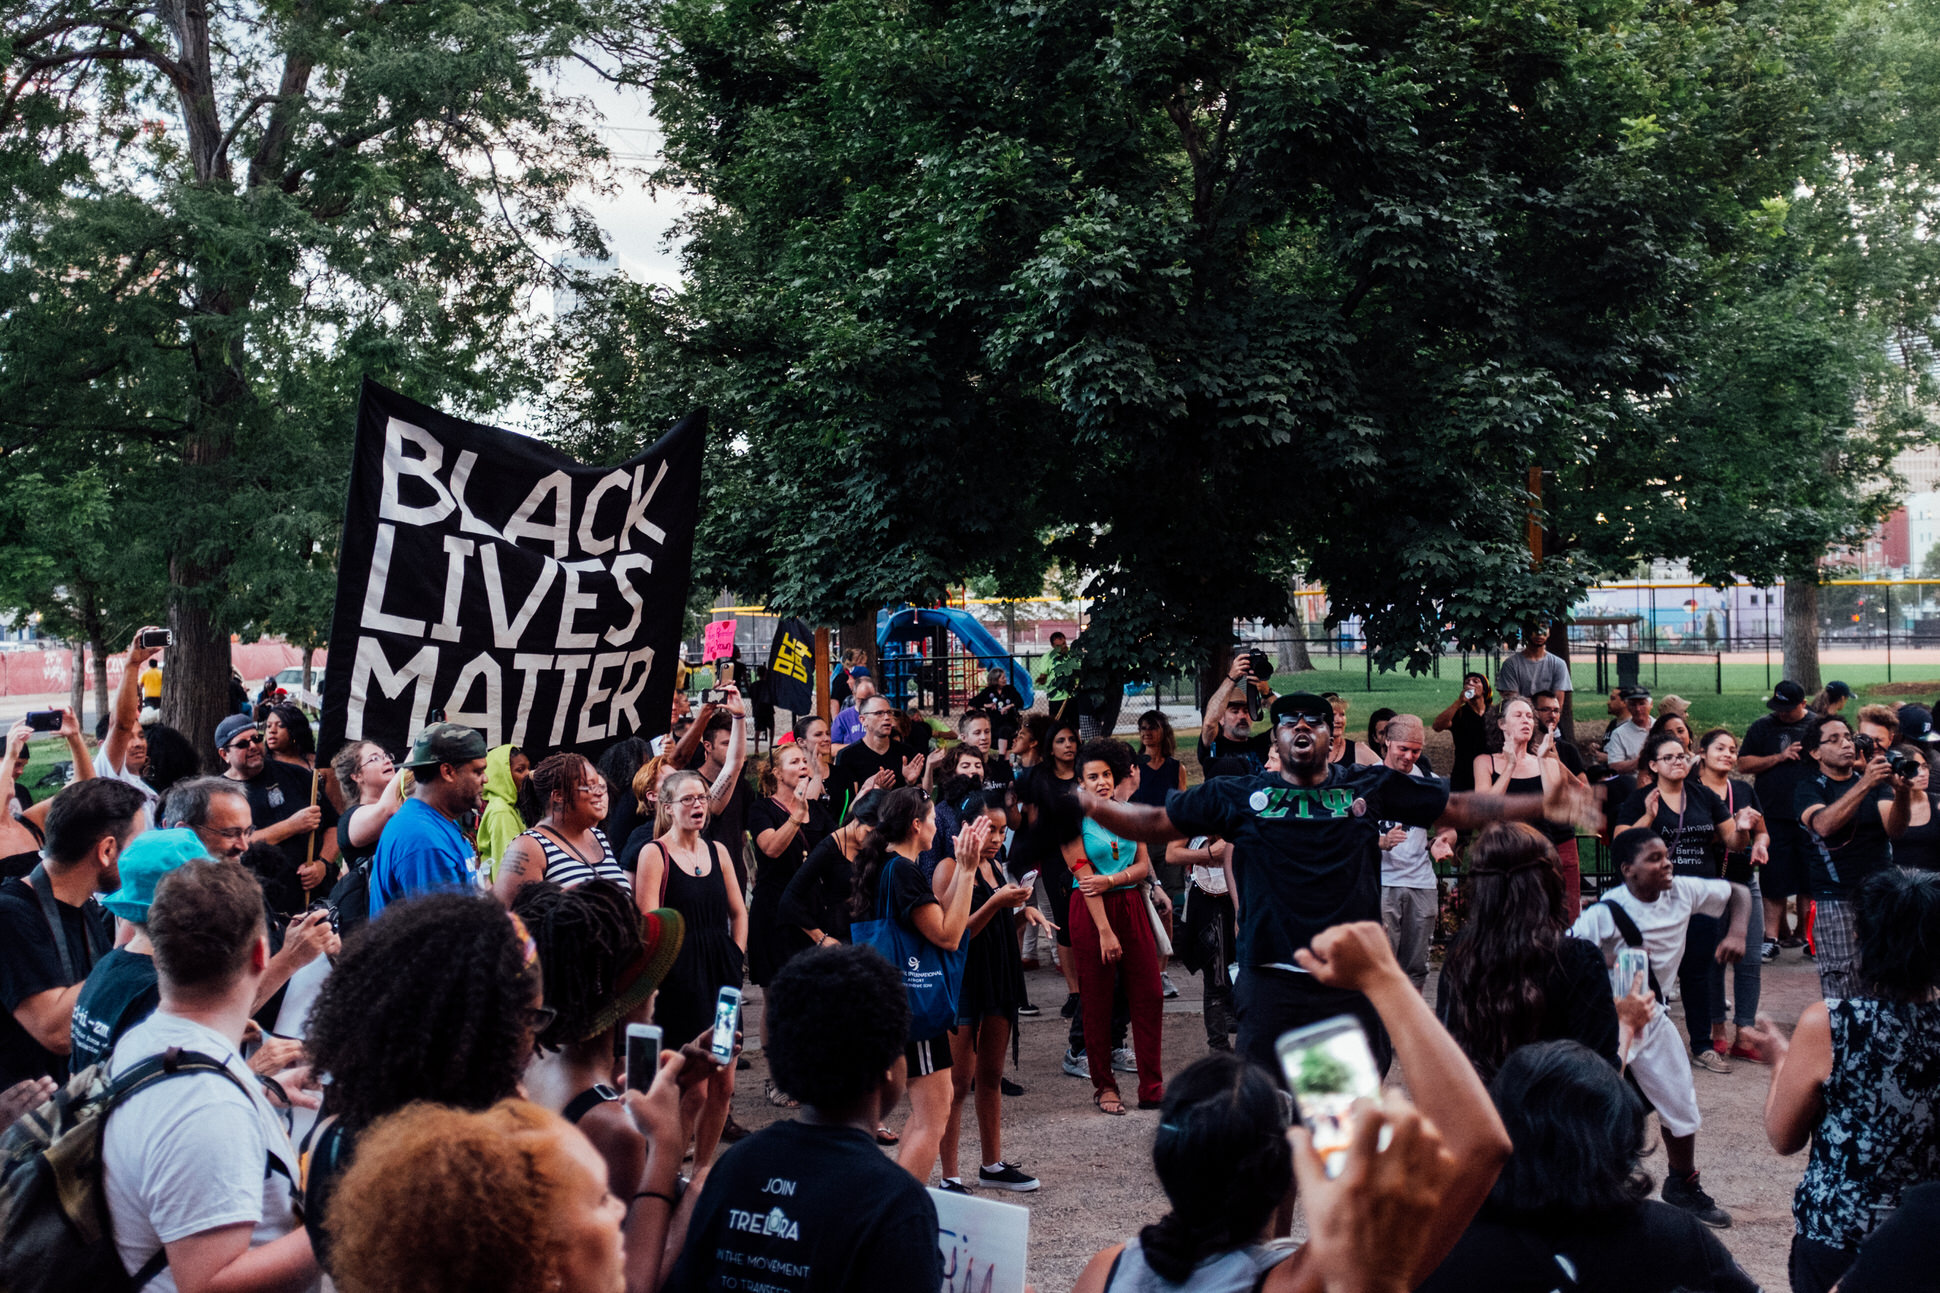 Participants in the BLM 5280 march return to Denver's Sonny Lawson Park to celebrate the conclusion of the peaceful protest.